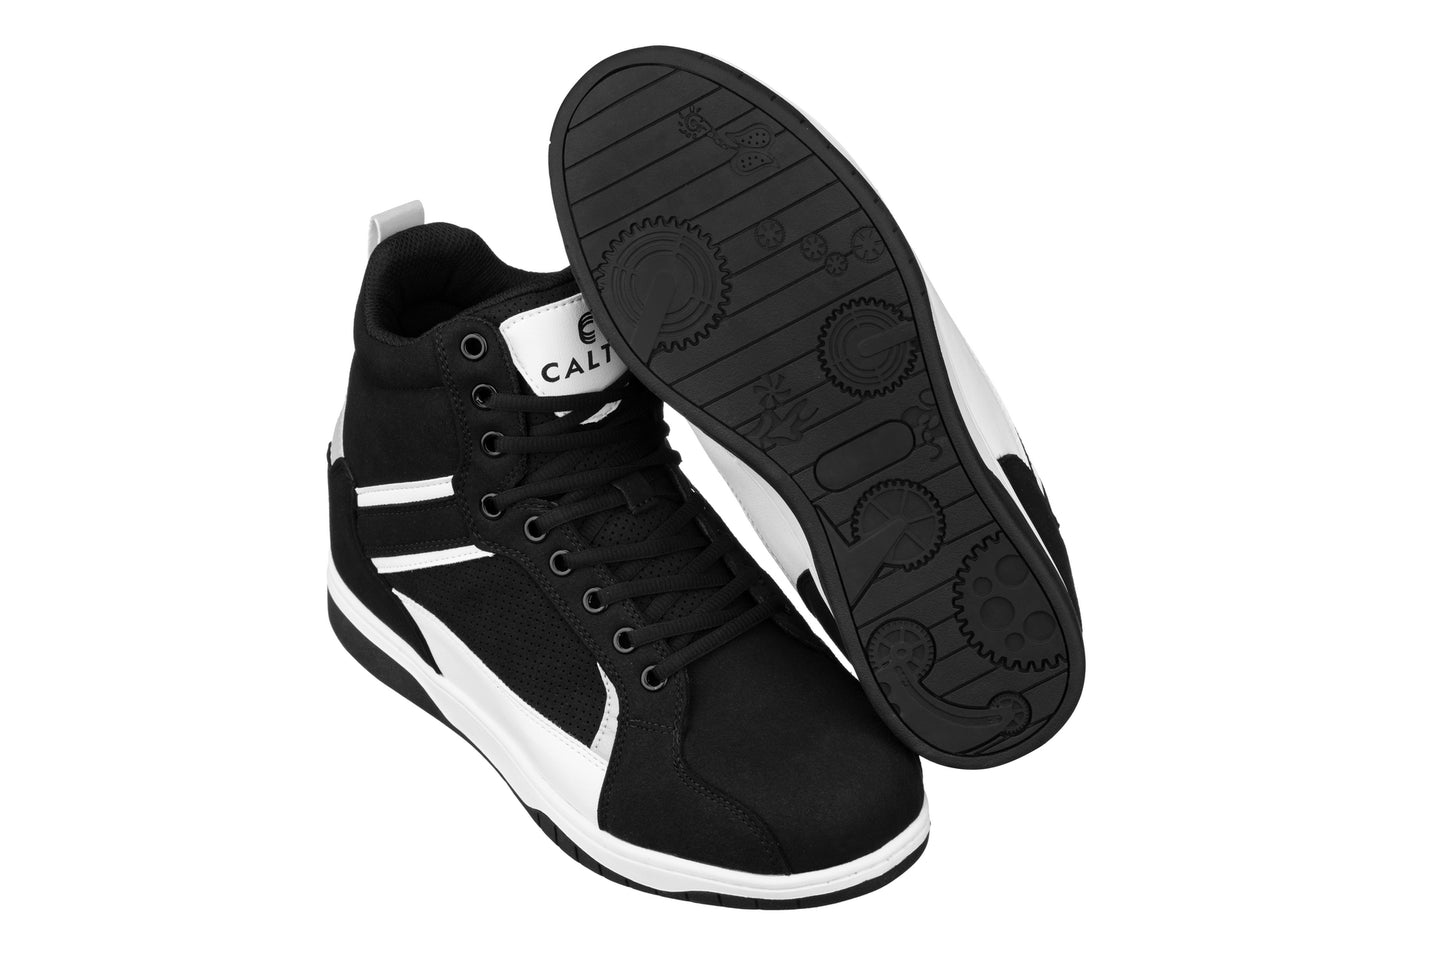 Elevator shoes height increase CALTO - S3720 - 3.2 Inches Taller (Black/White) - Sneakers